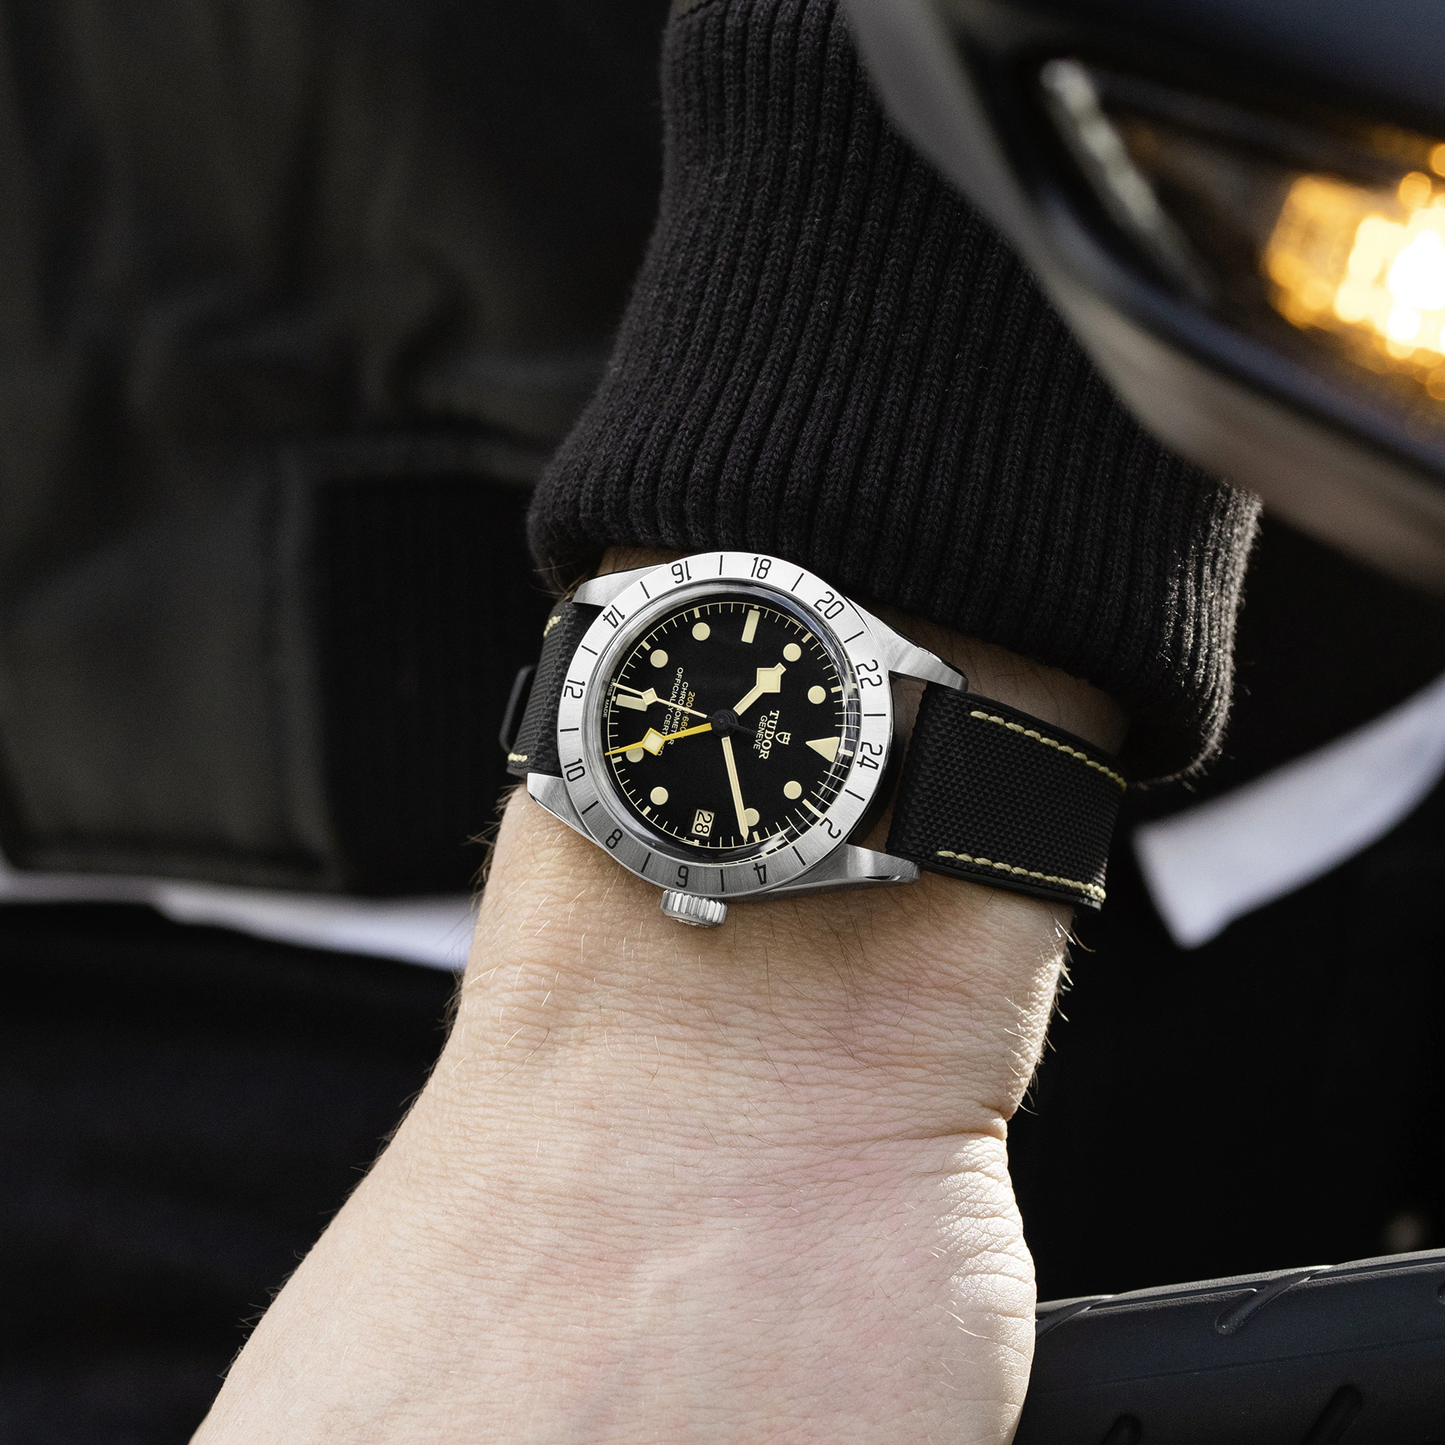 Tudor Black Bay Pro, 39mm, Stainless Steel, Ref# M79470-0003, Watch on hand